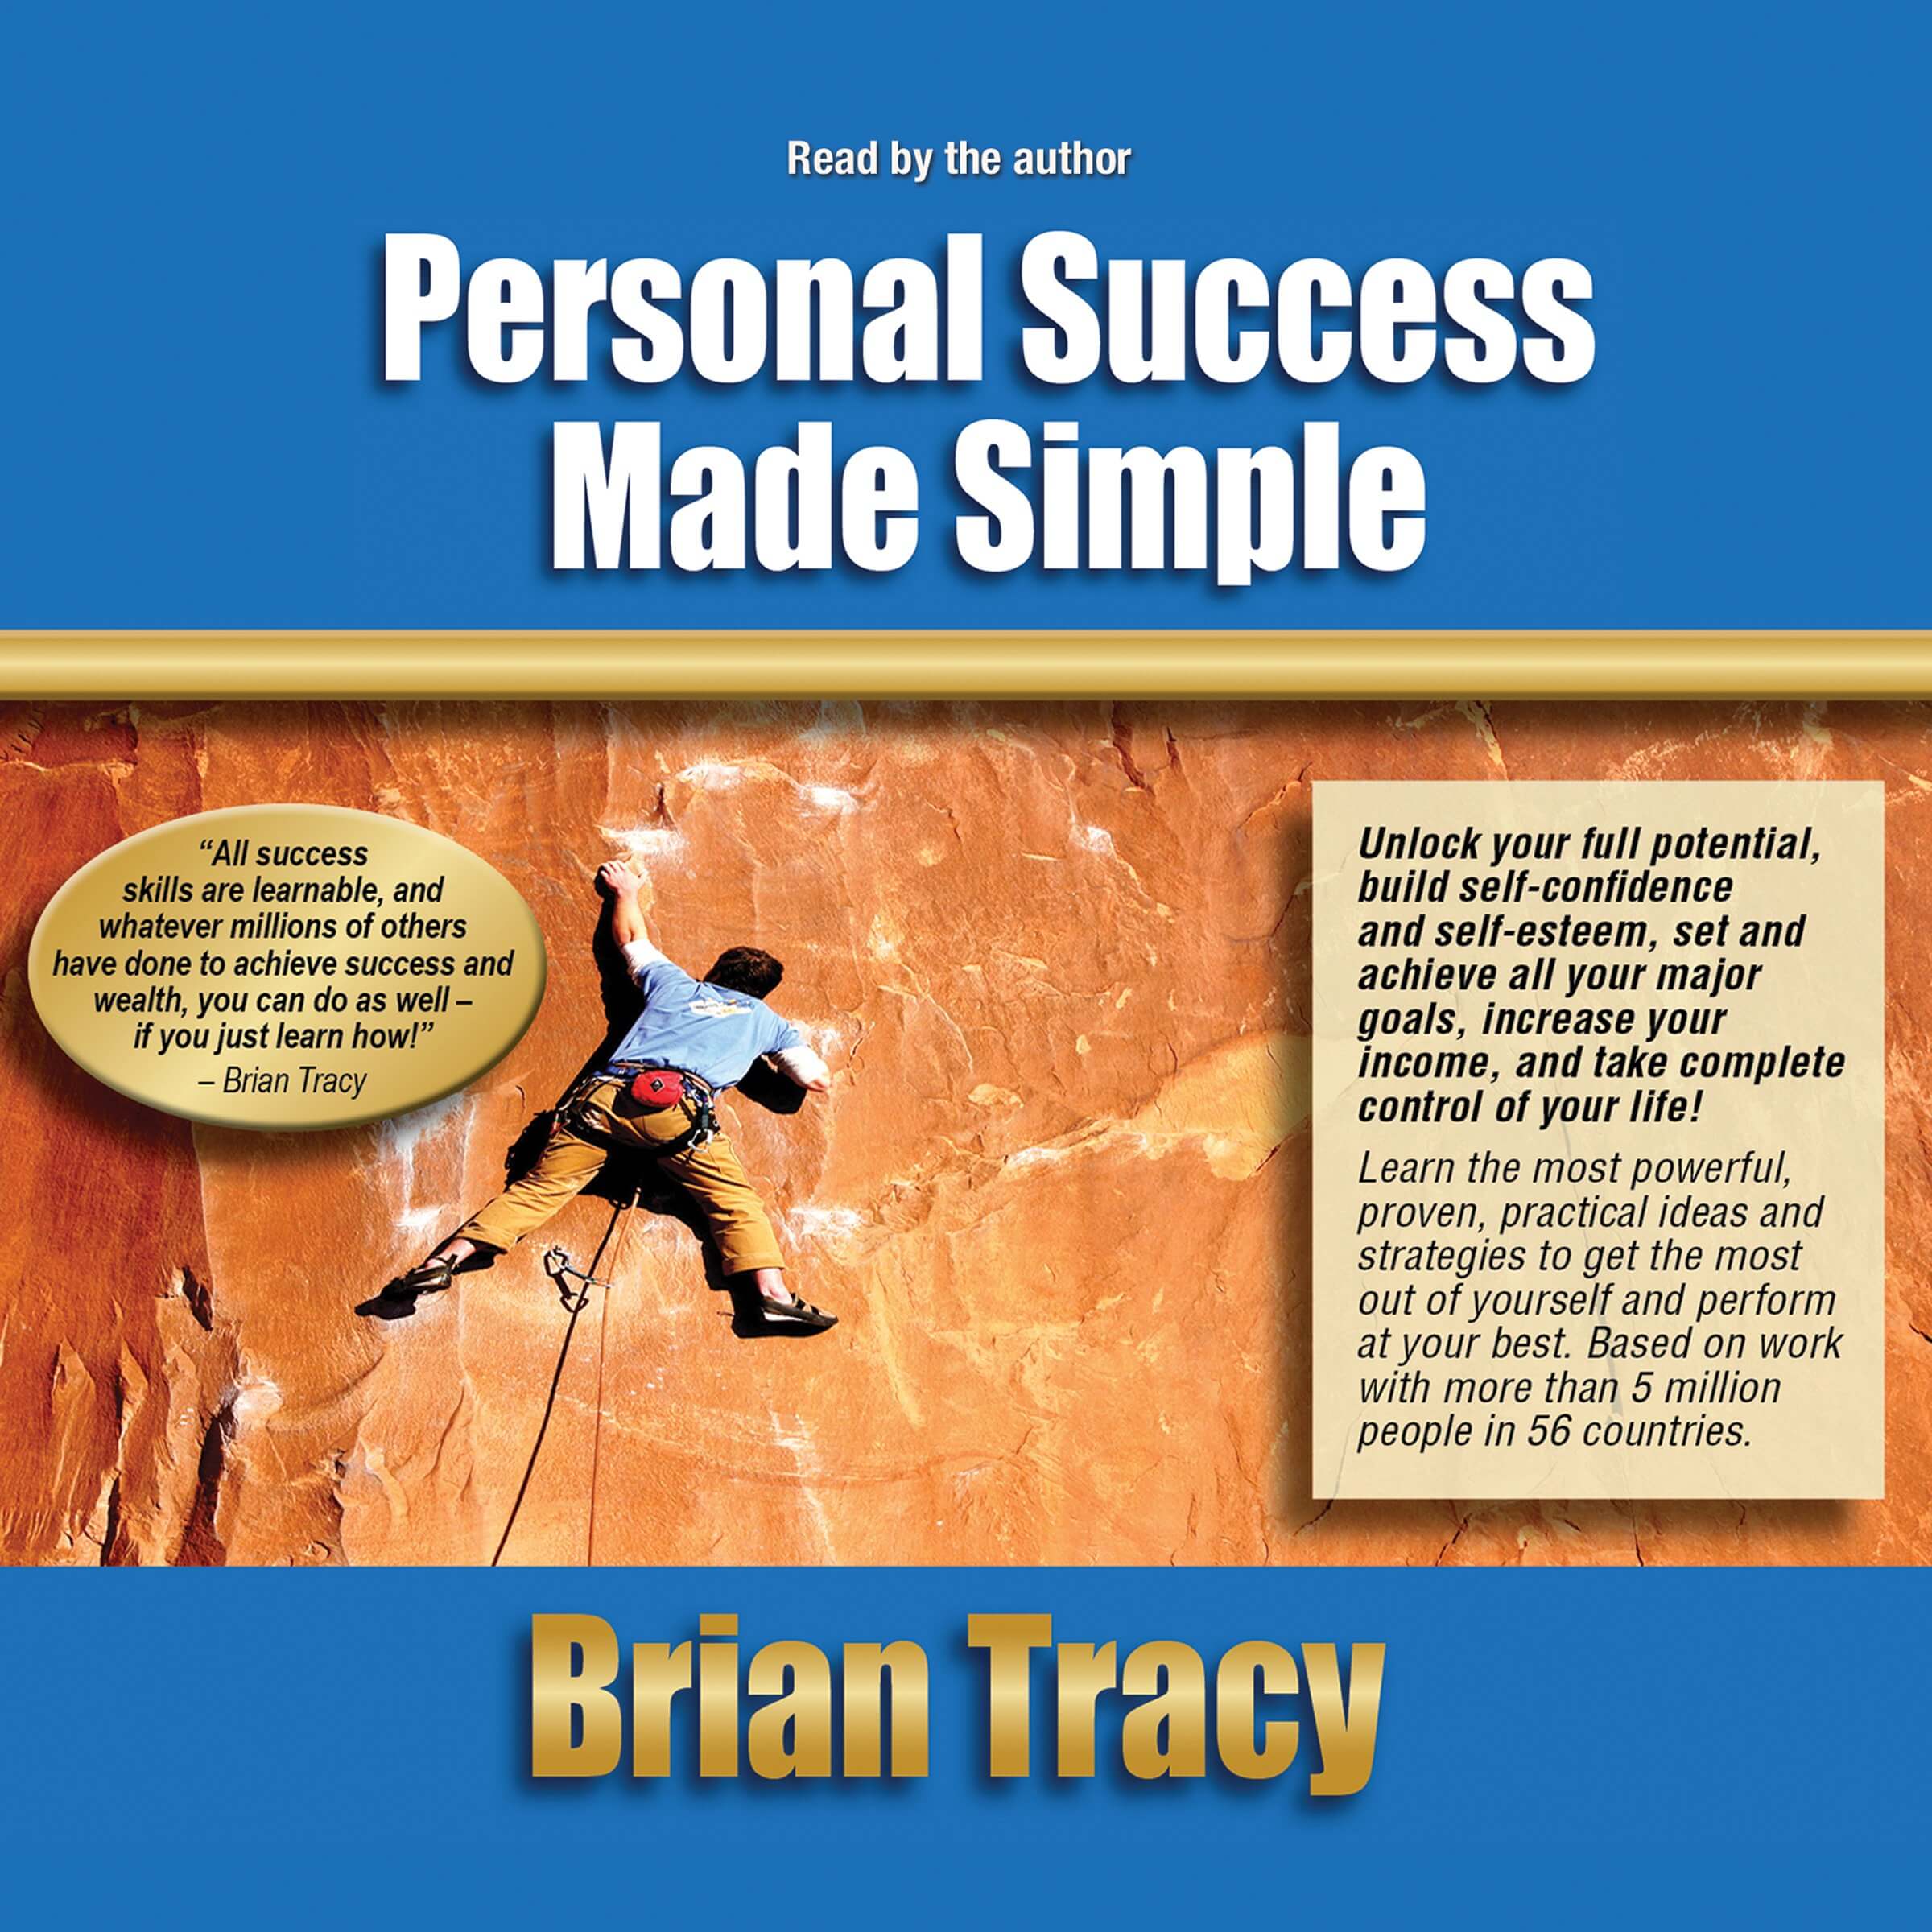 Brian Tracy - Personal Success Made Simple